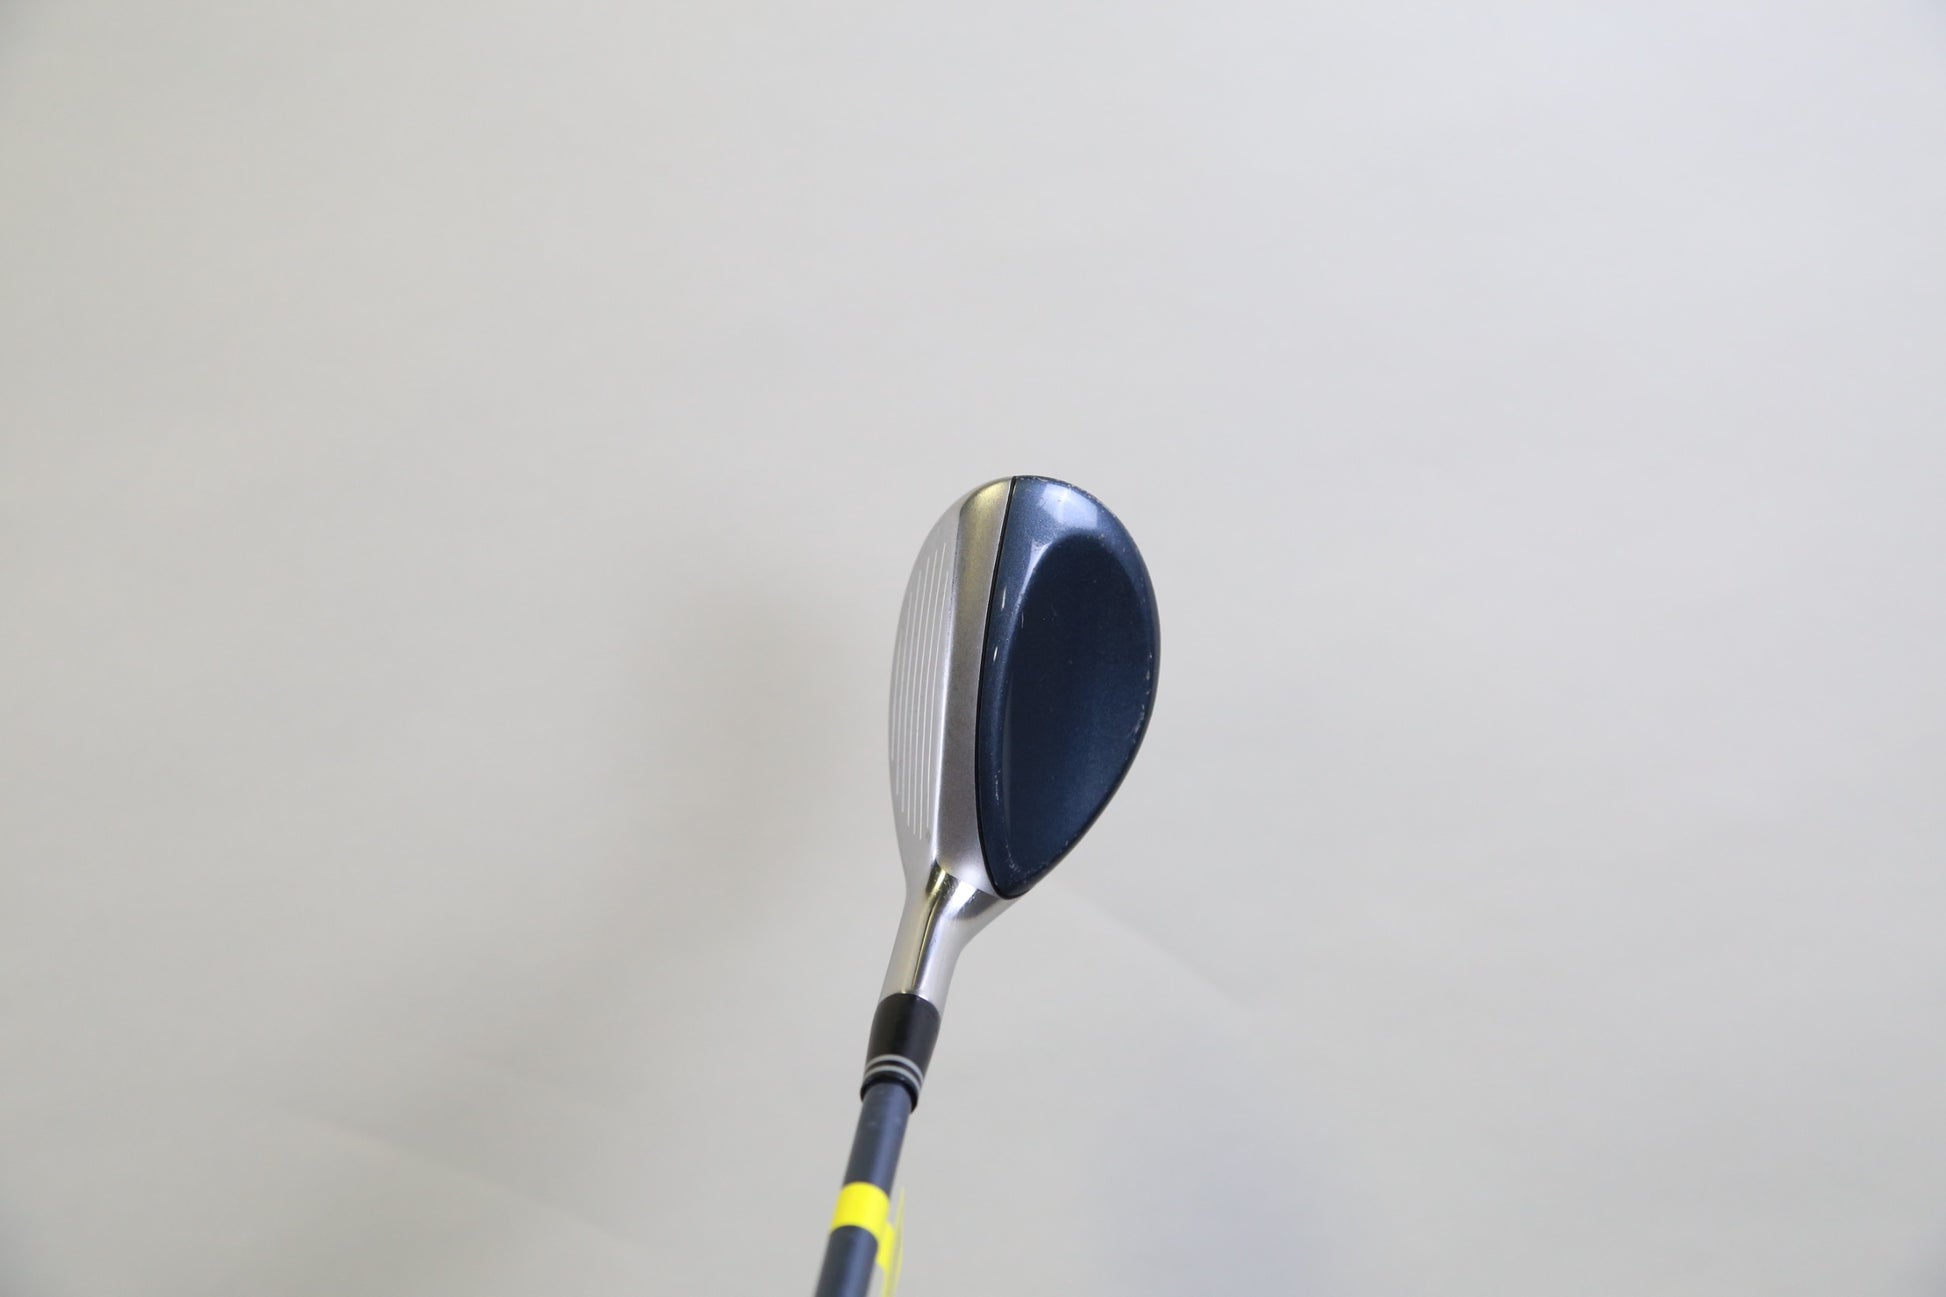 Used Cleveland HALO 5H Hybrid - Right-Handed - 28 Degrees - Ladies Flex-Next Round